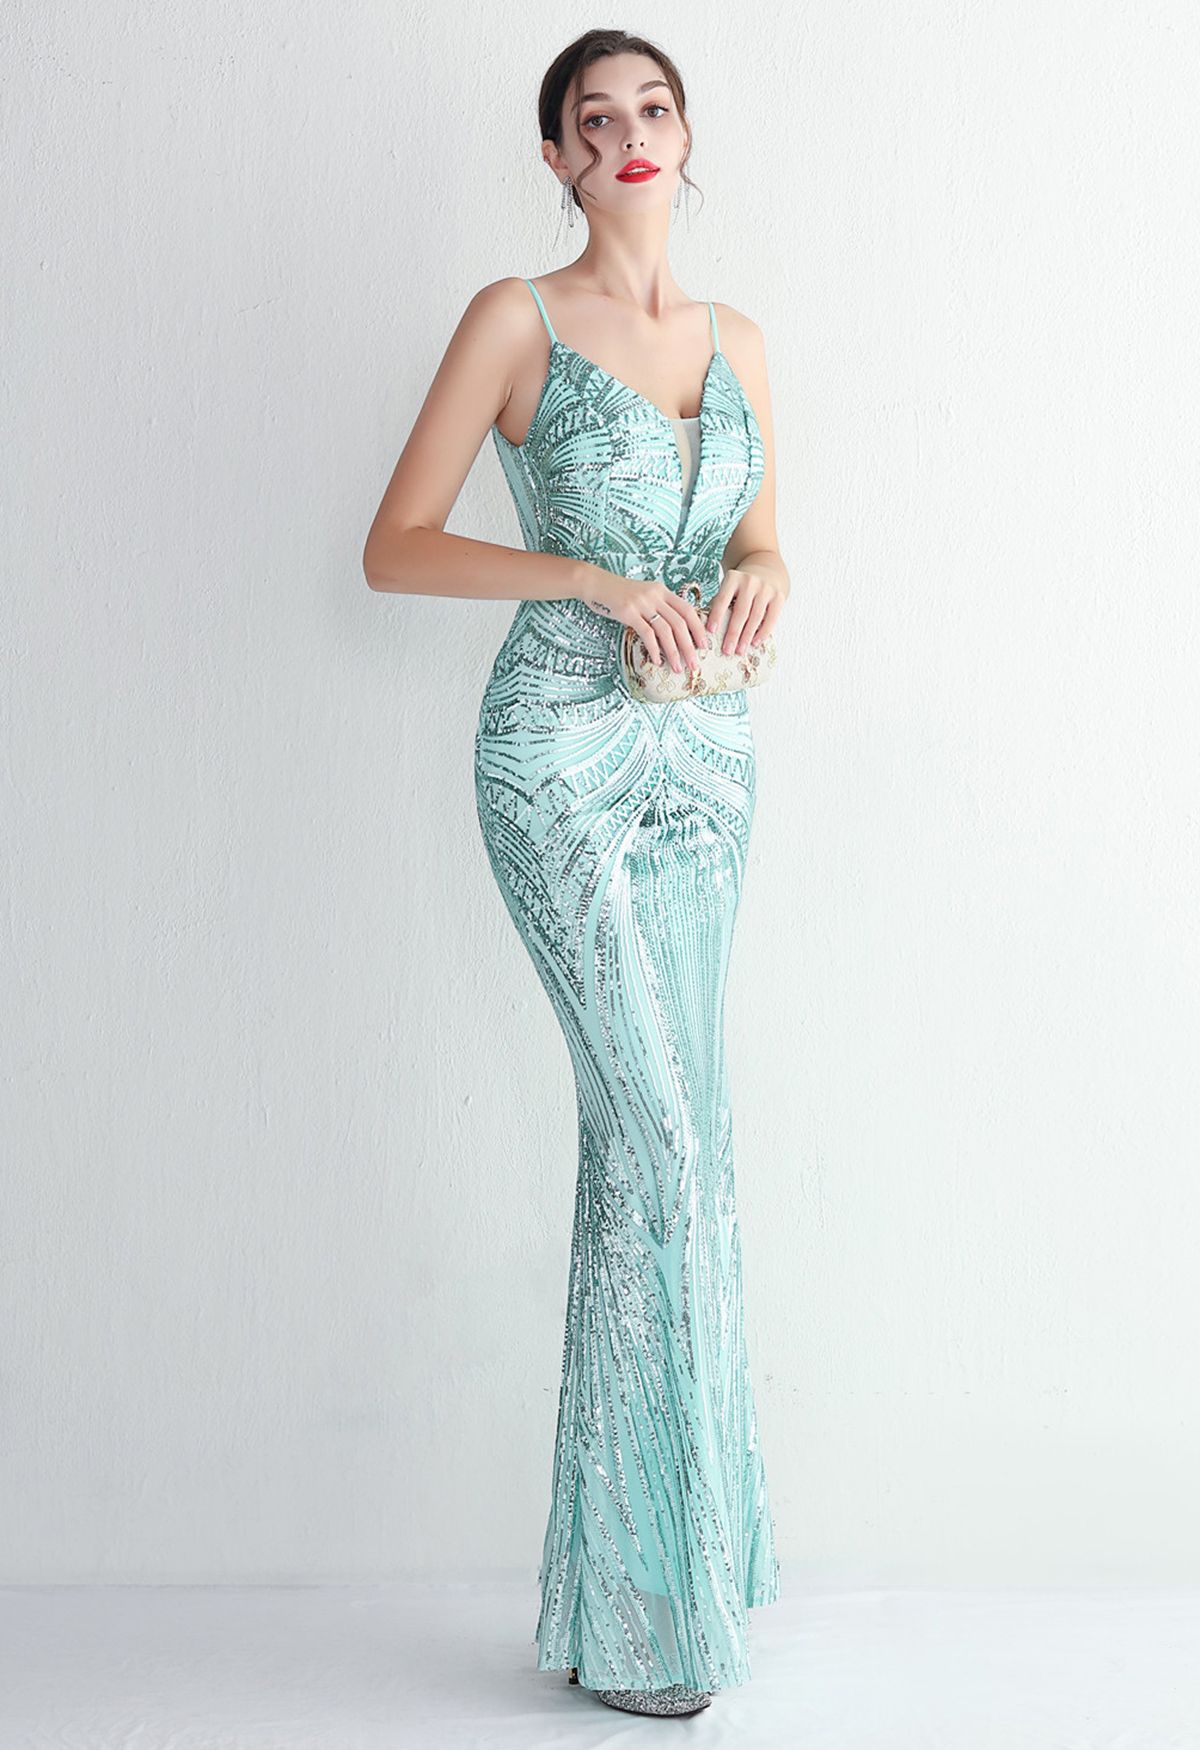 Glimmer Sequin Mermaid Cami Gown in Mint - Retro, Indie and Unique Fashion